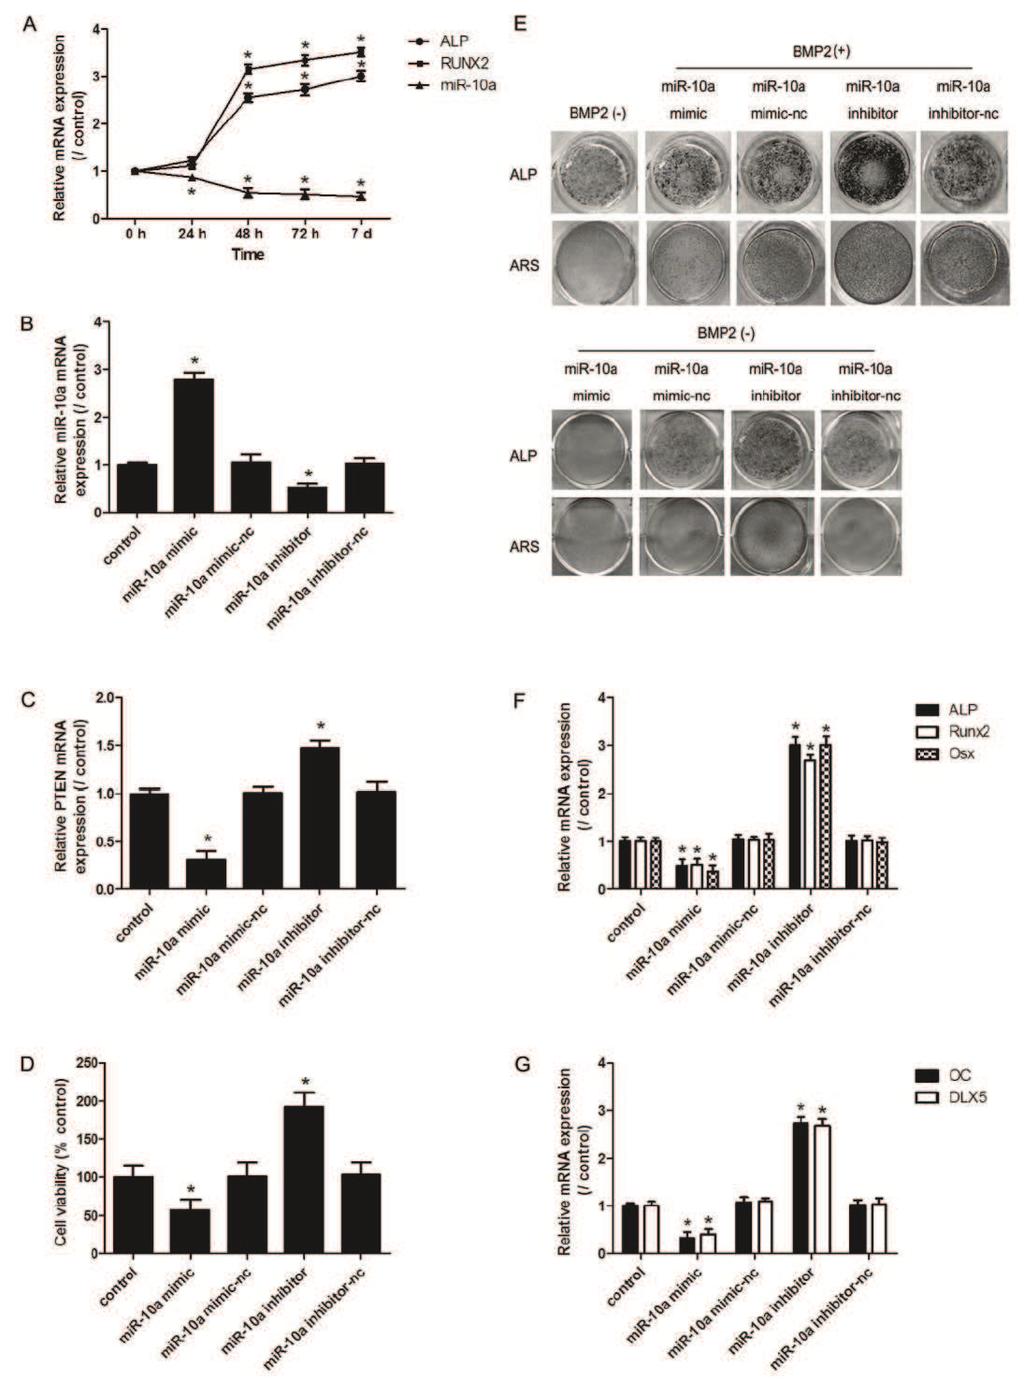 2199 MiR-10a inhibits BMP2-induced MC3T3-E1 osteogenic differentiation. The MC3T3-E1 cells was tre- h, the mrna expression of mir-10a was analyzed (B).